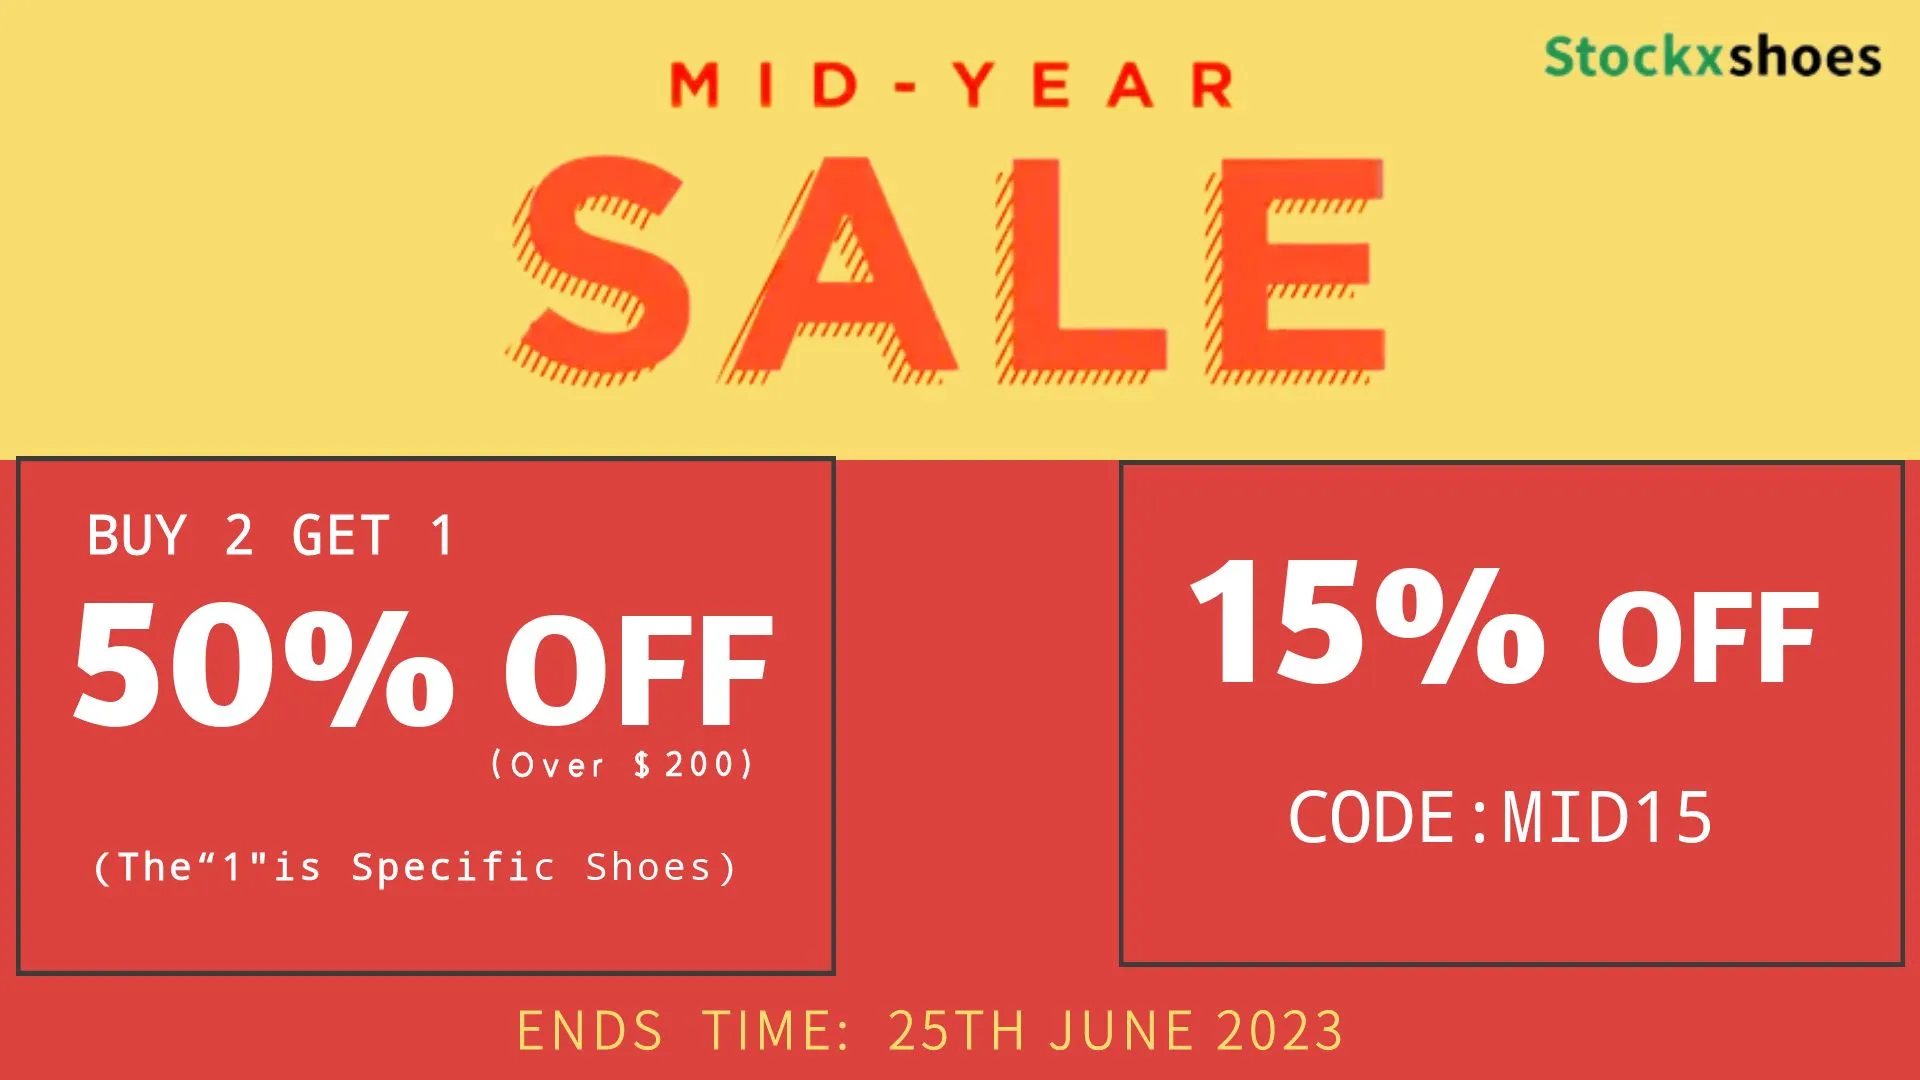 stockxshoes mid year sale